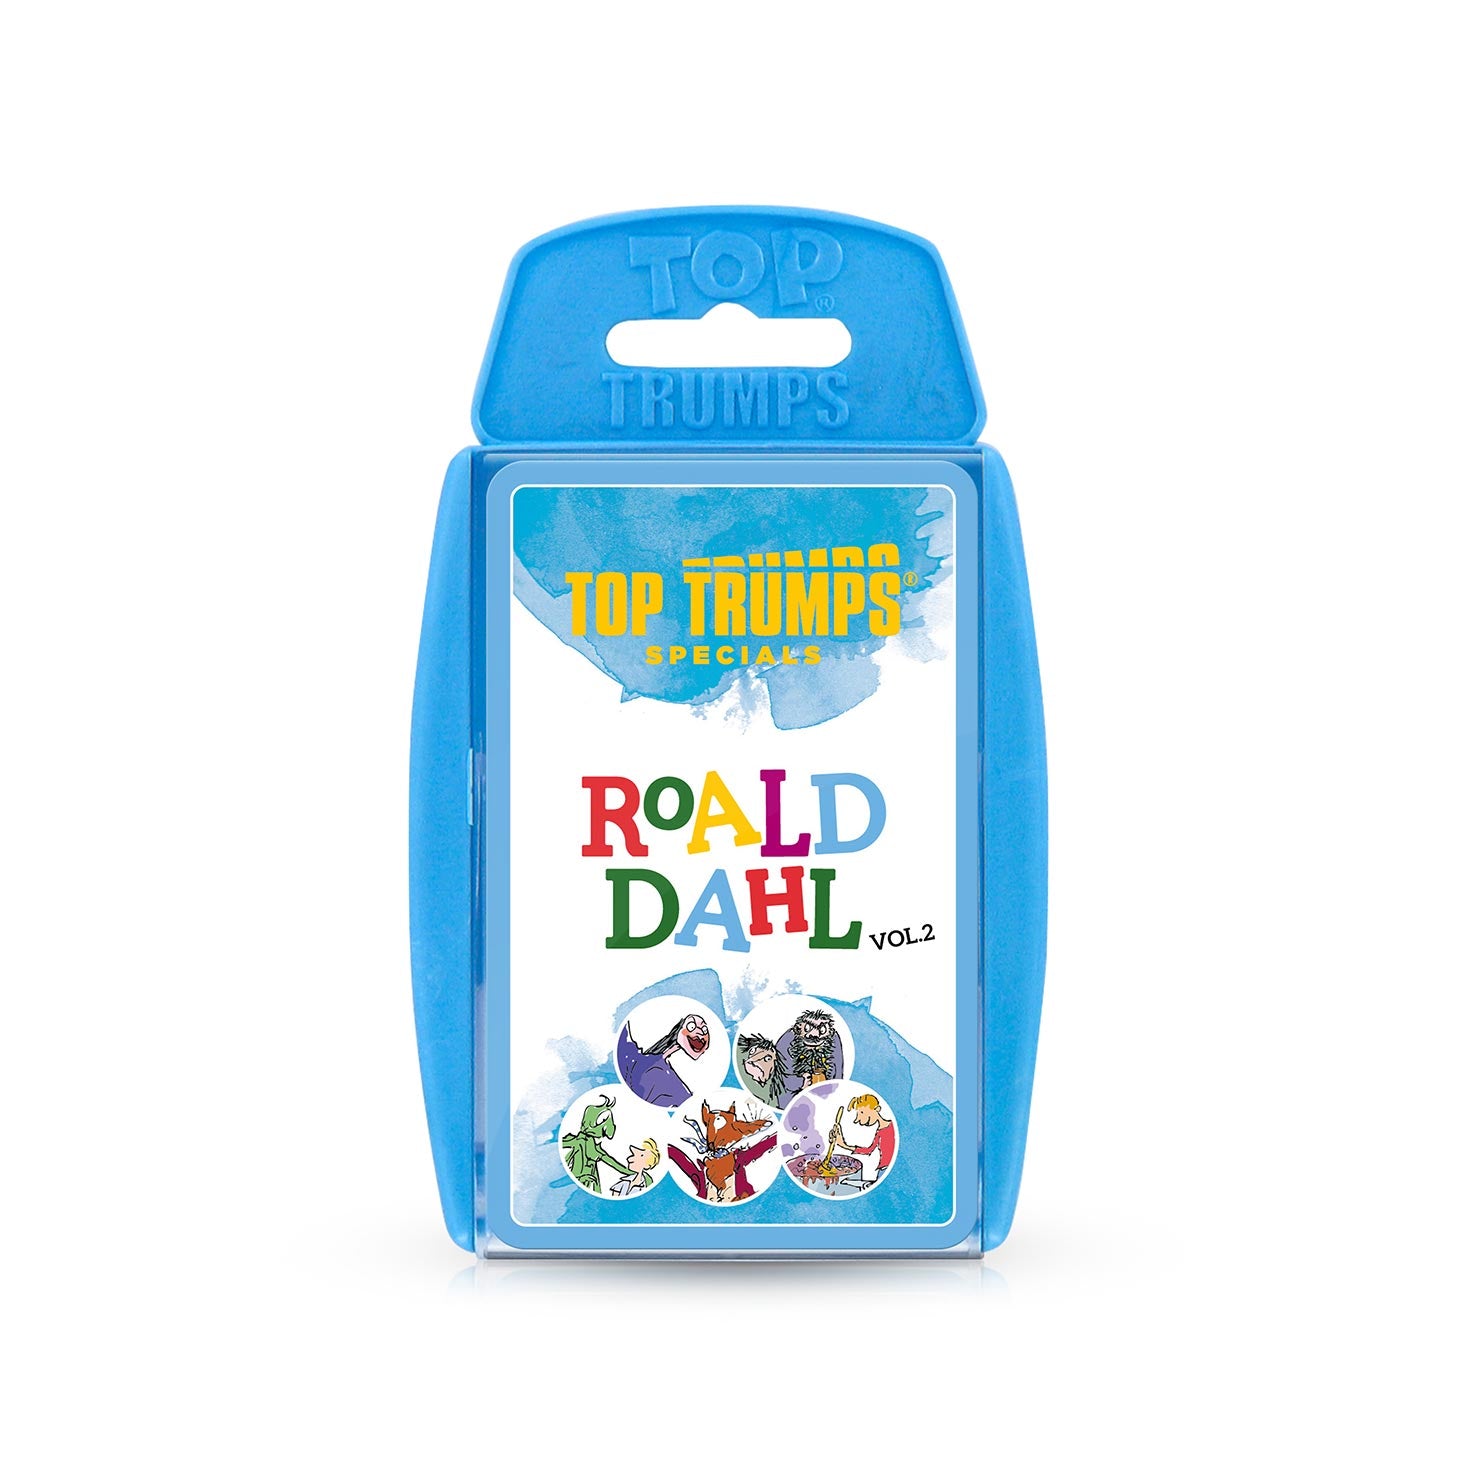 Top Trumps game based on Roald Dahl stories and with illustrations by Quentin Blake